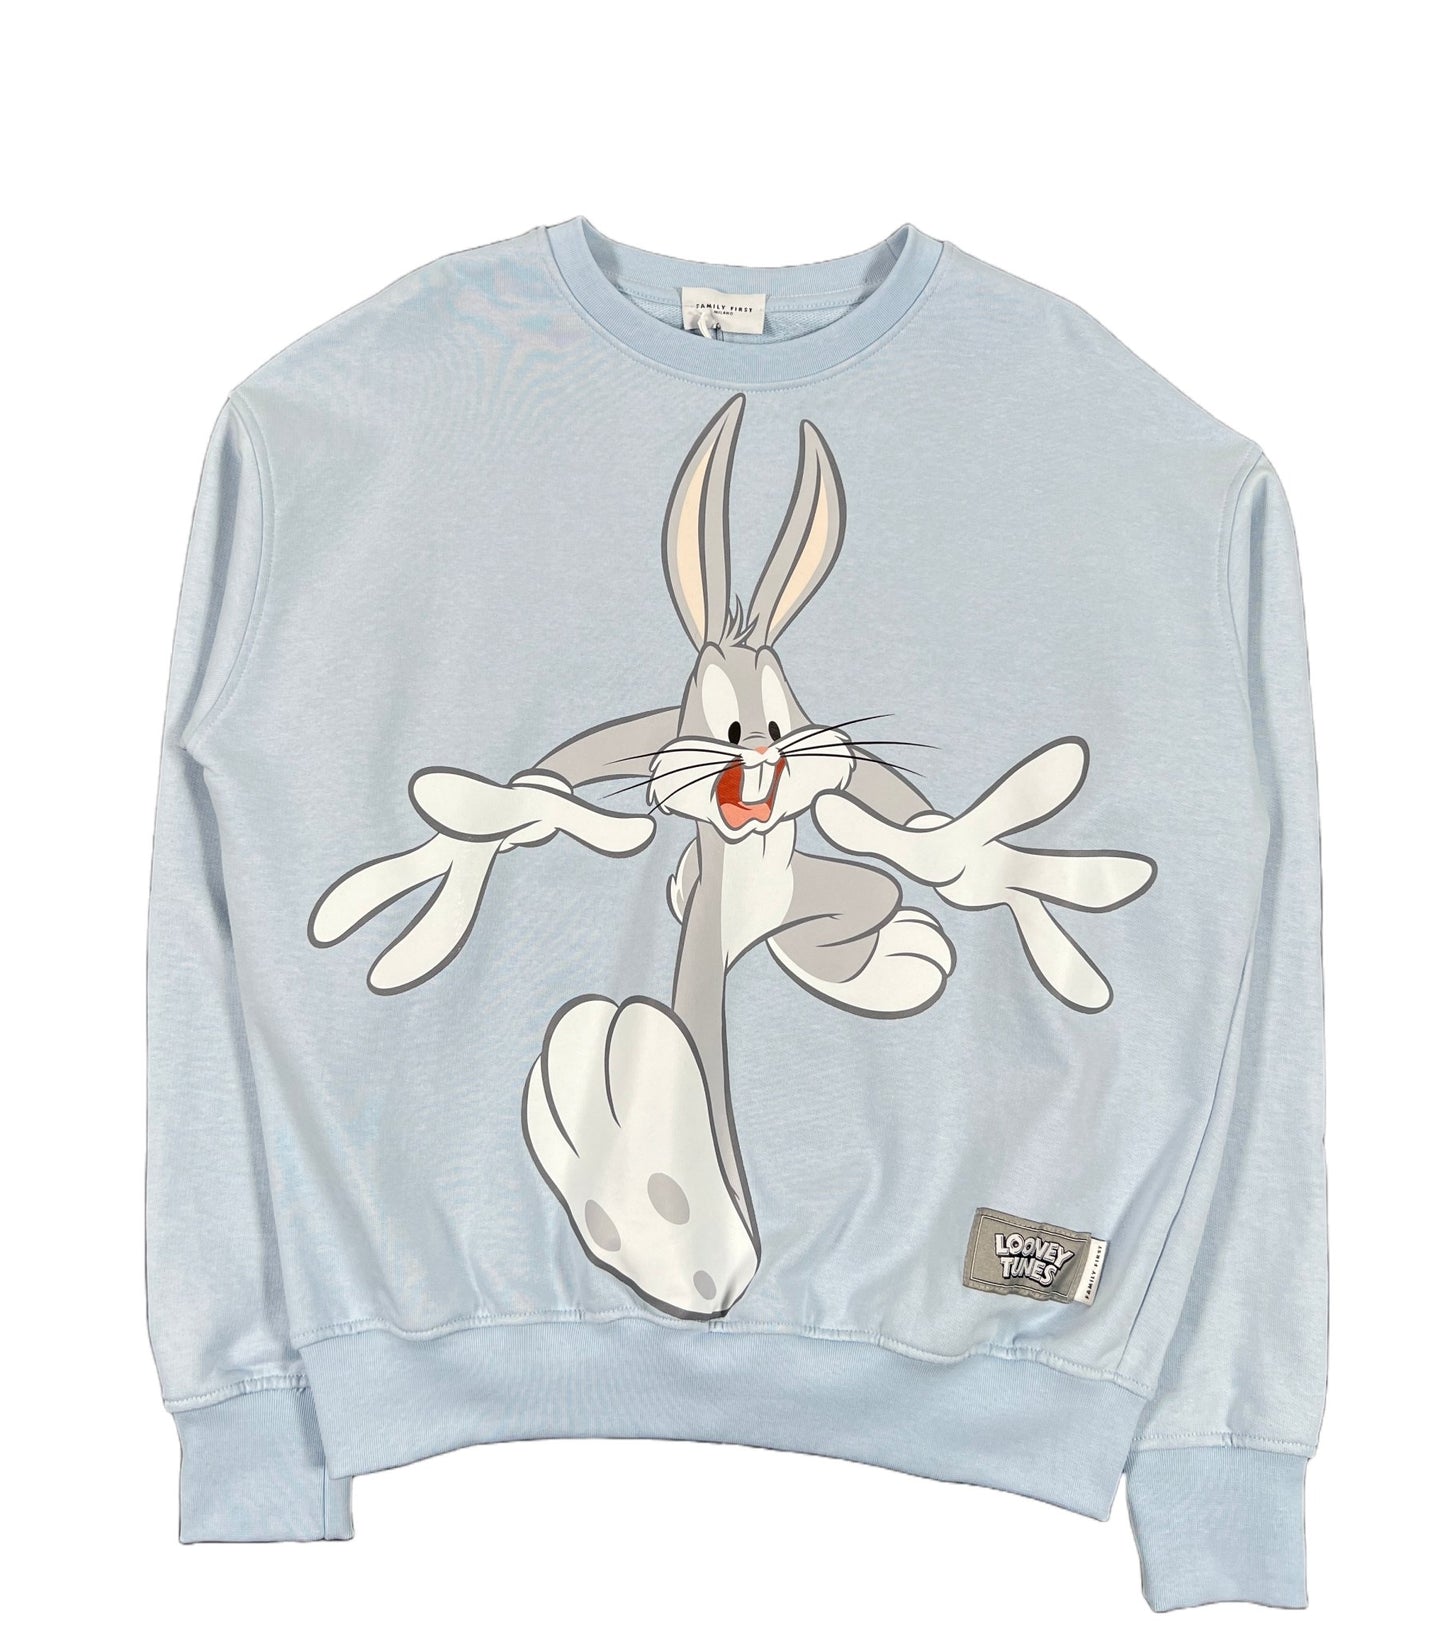 Probus FAMILY FIRST SS2307 CREWNECK BUGS LIGHT BLUE S